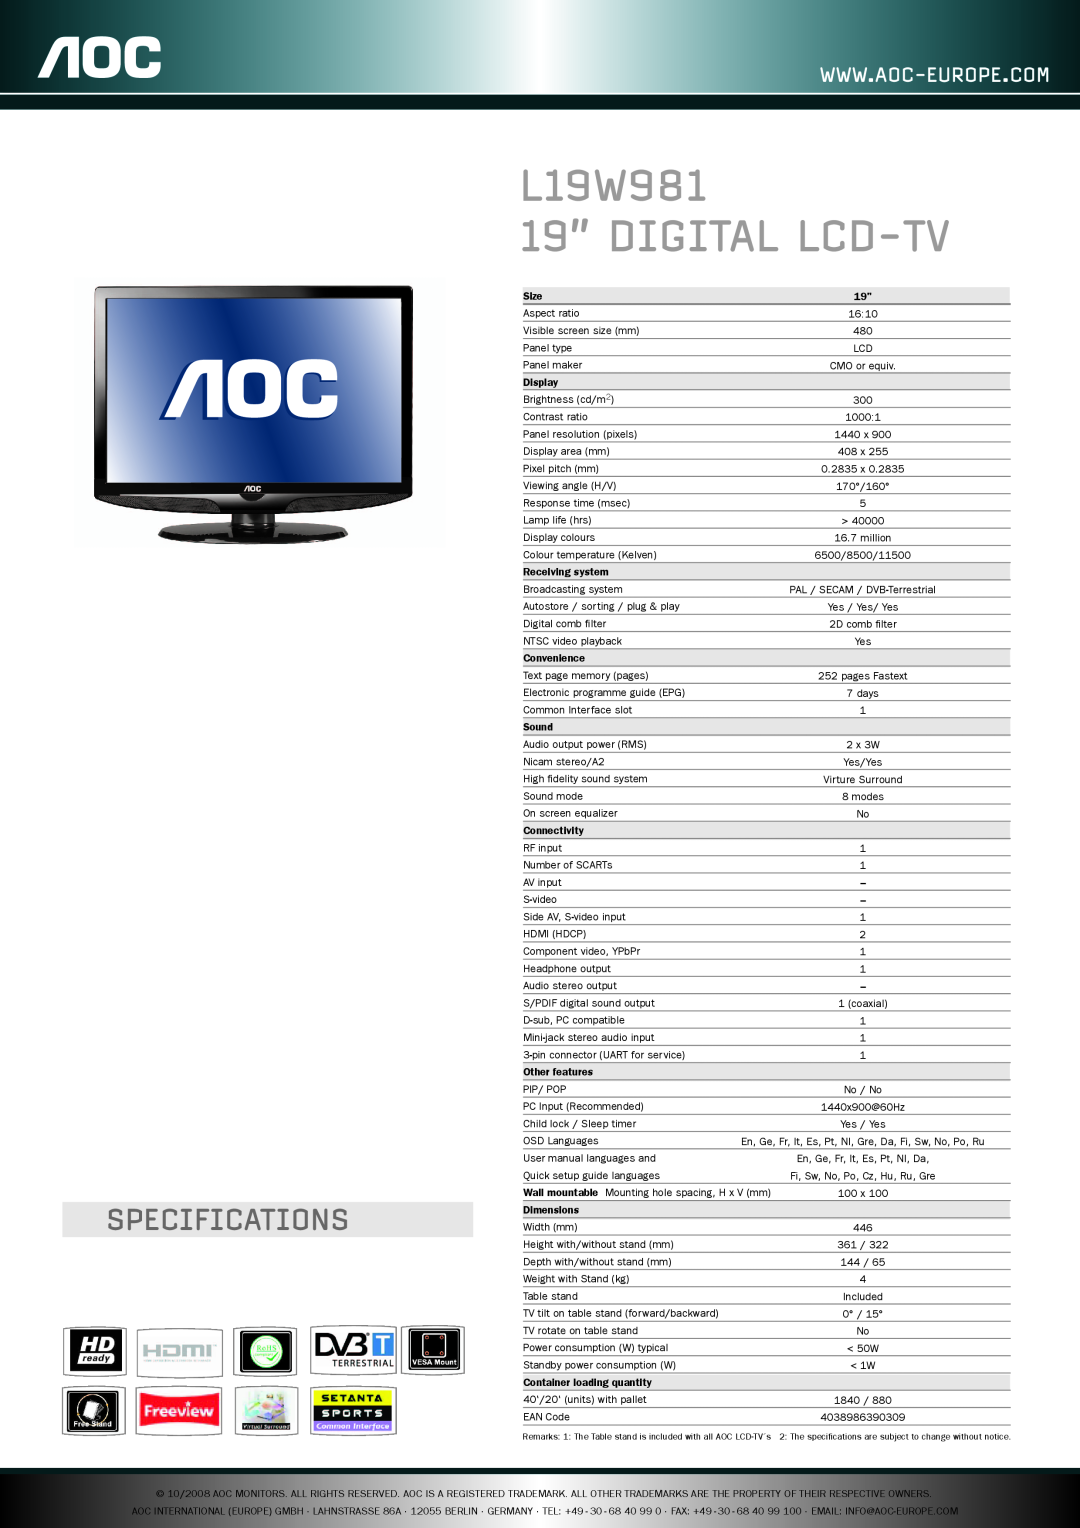 AOC specifications L19W981 19” DIGITAL LCD-TV, Specifications 